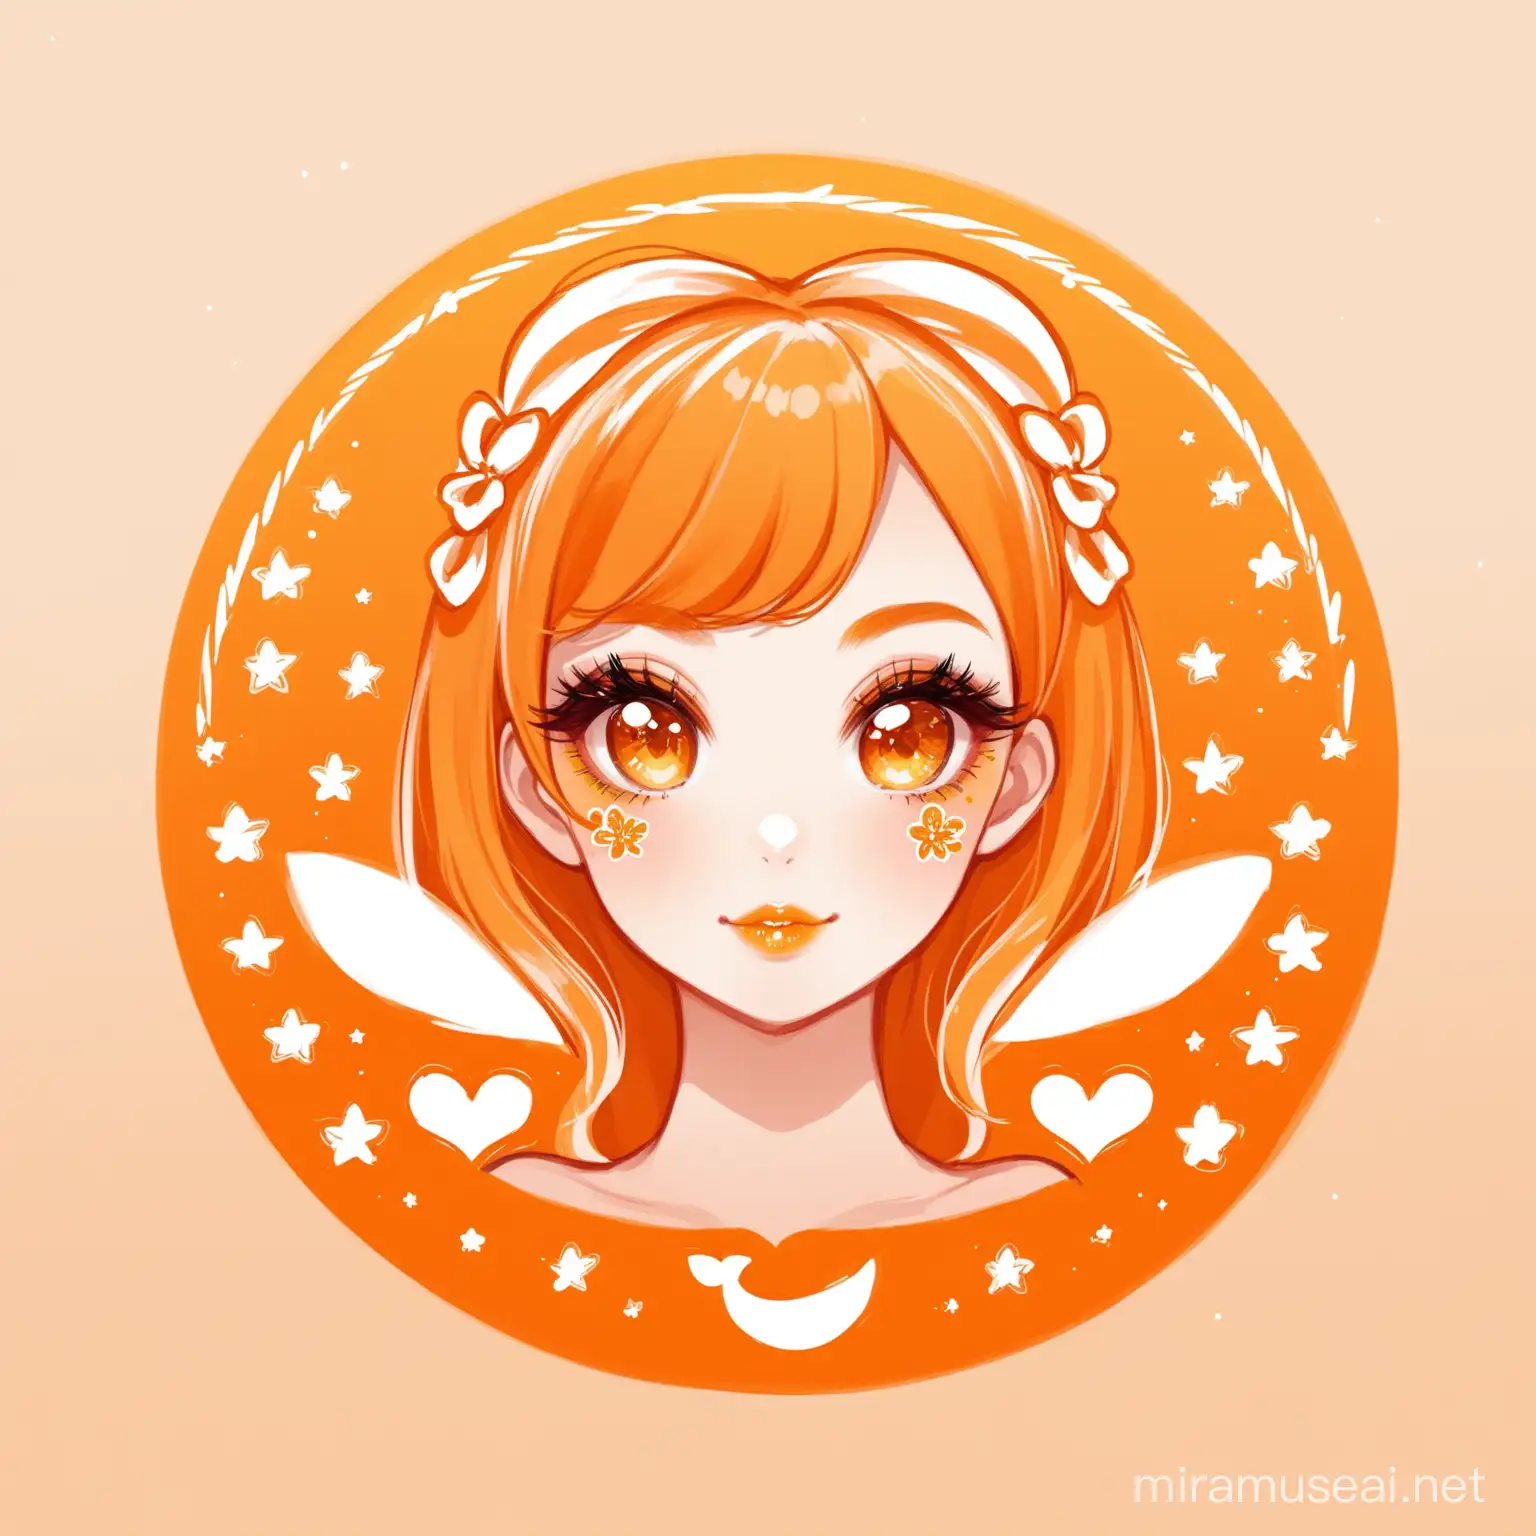 a girly orange logo for nail artist profile page.